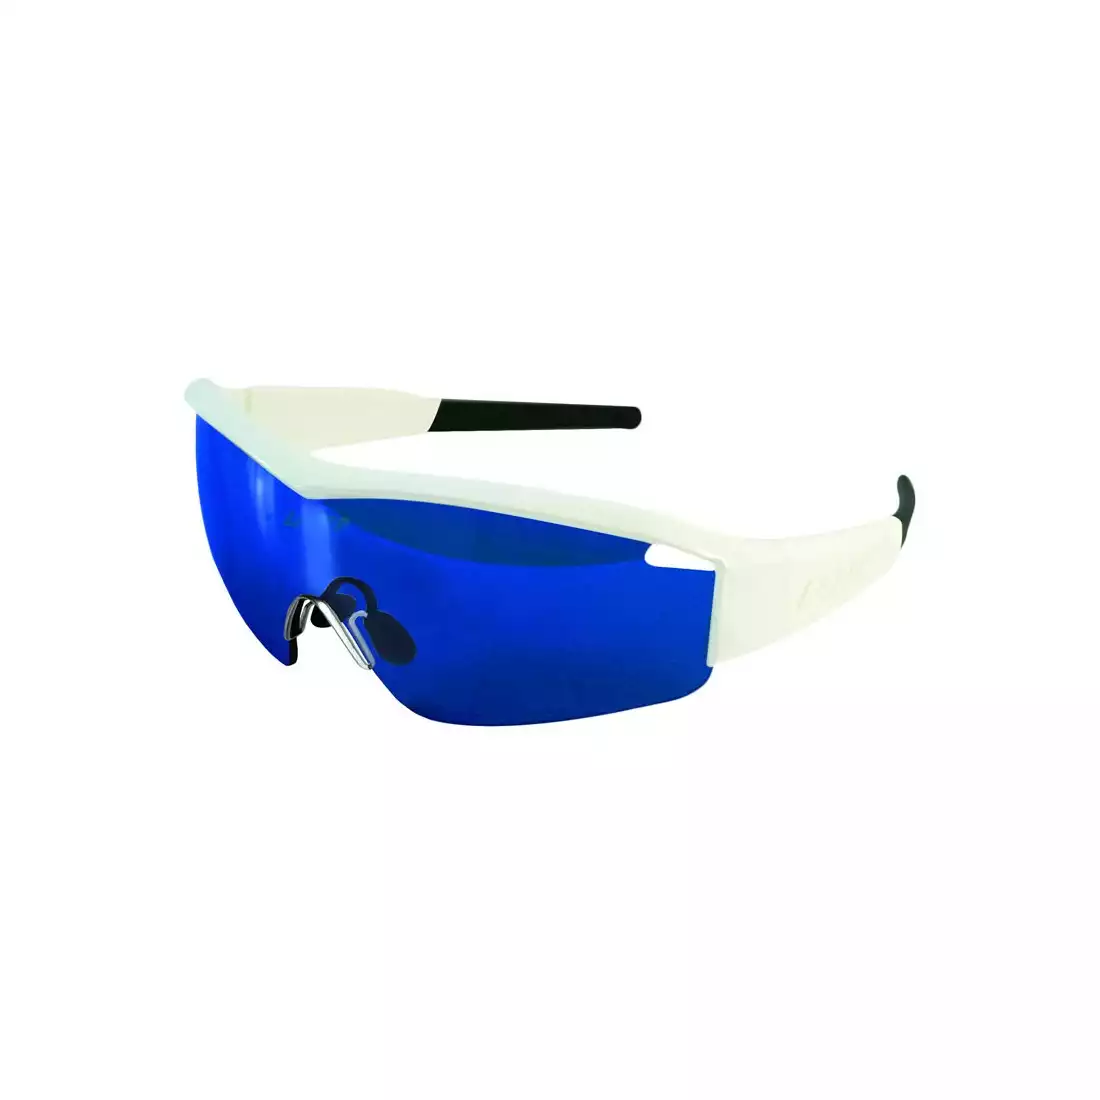 LZR-OKL-SOLD-GLWH Okulary LAZER SS17 SOLID STATE1 Gloss White (Smoke-Blue REVO. Yellow-Blue Mirror. Clear)